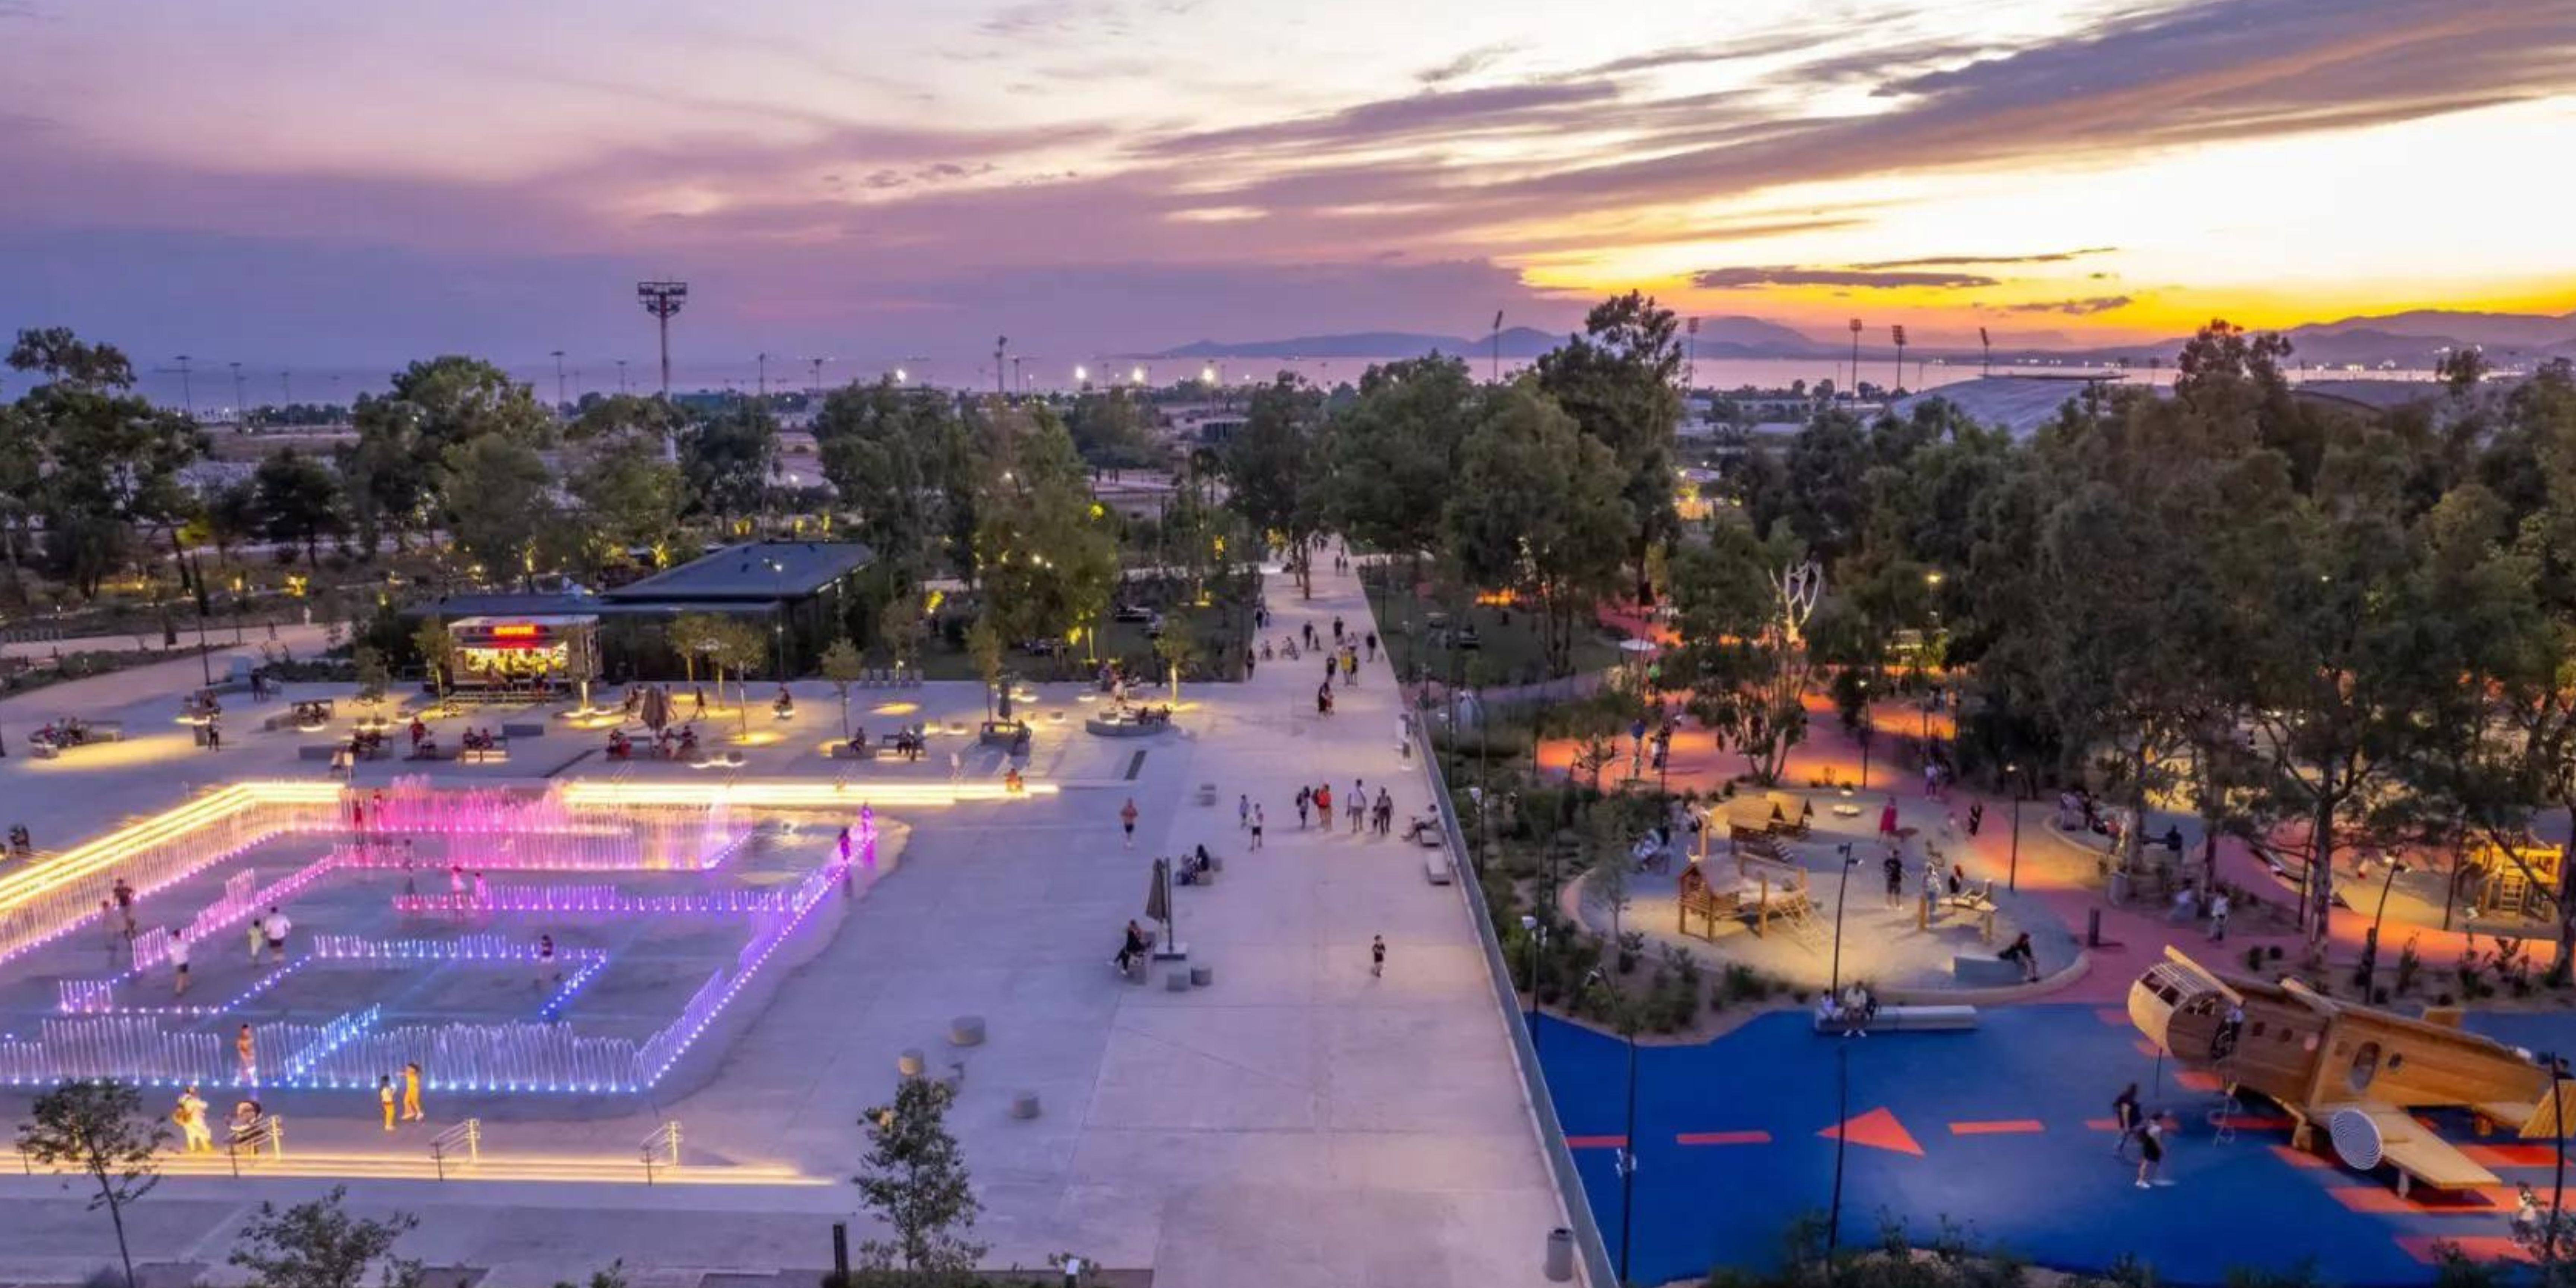 Evening view of Ellinikon Experience Park with lit fountains and recreational areas.